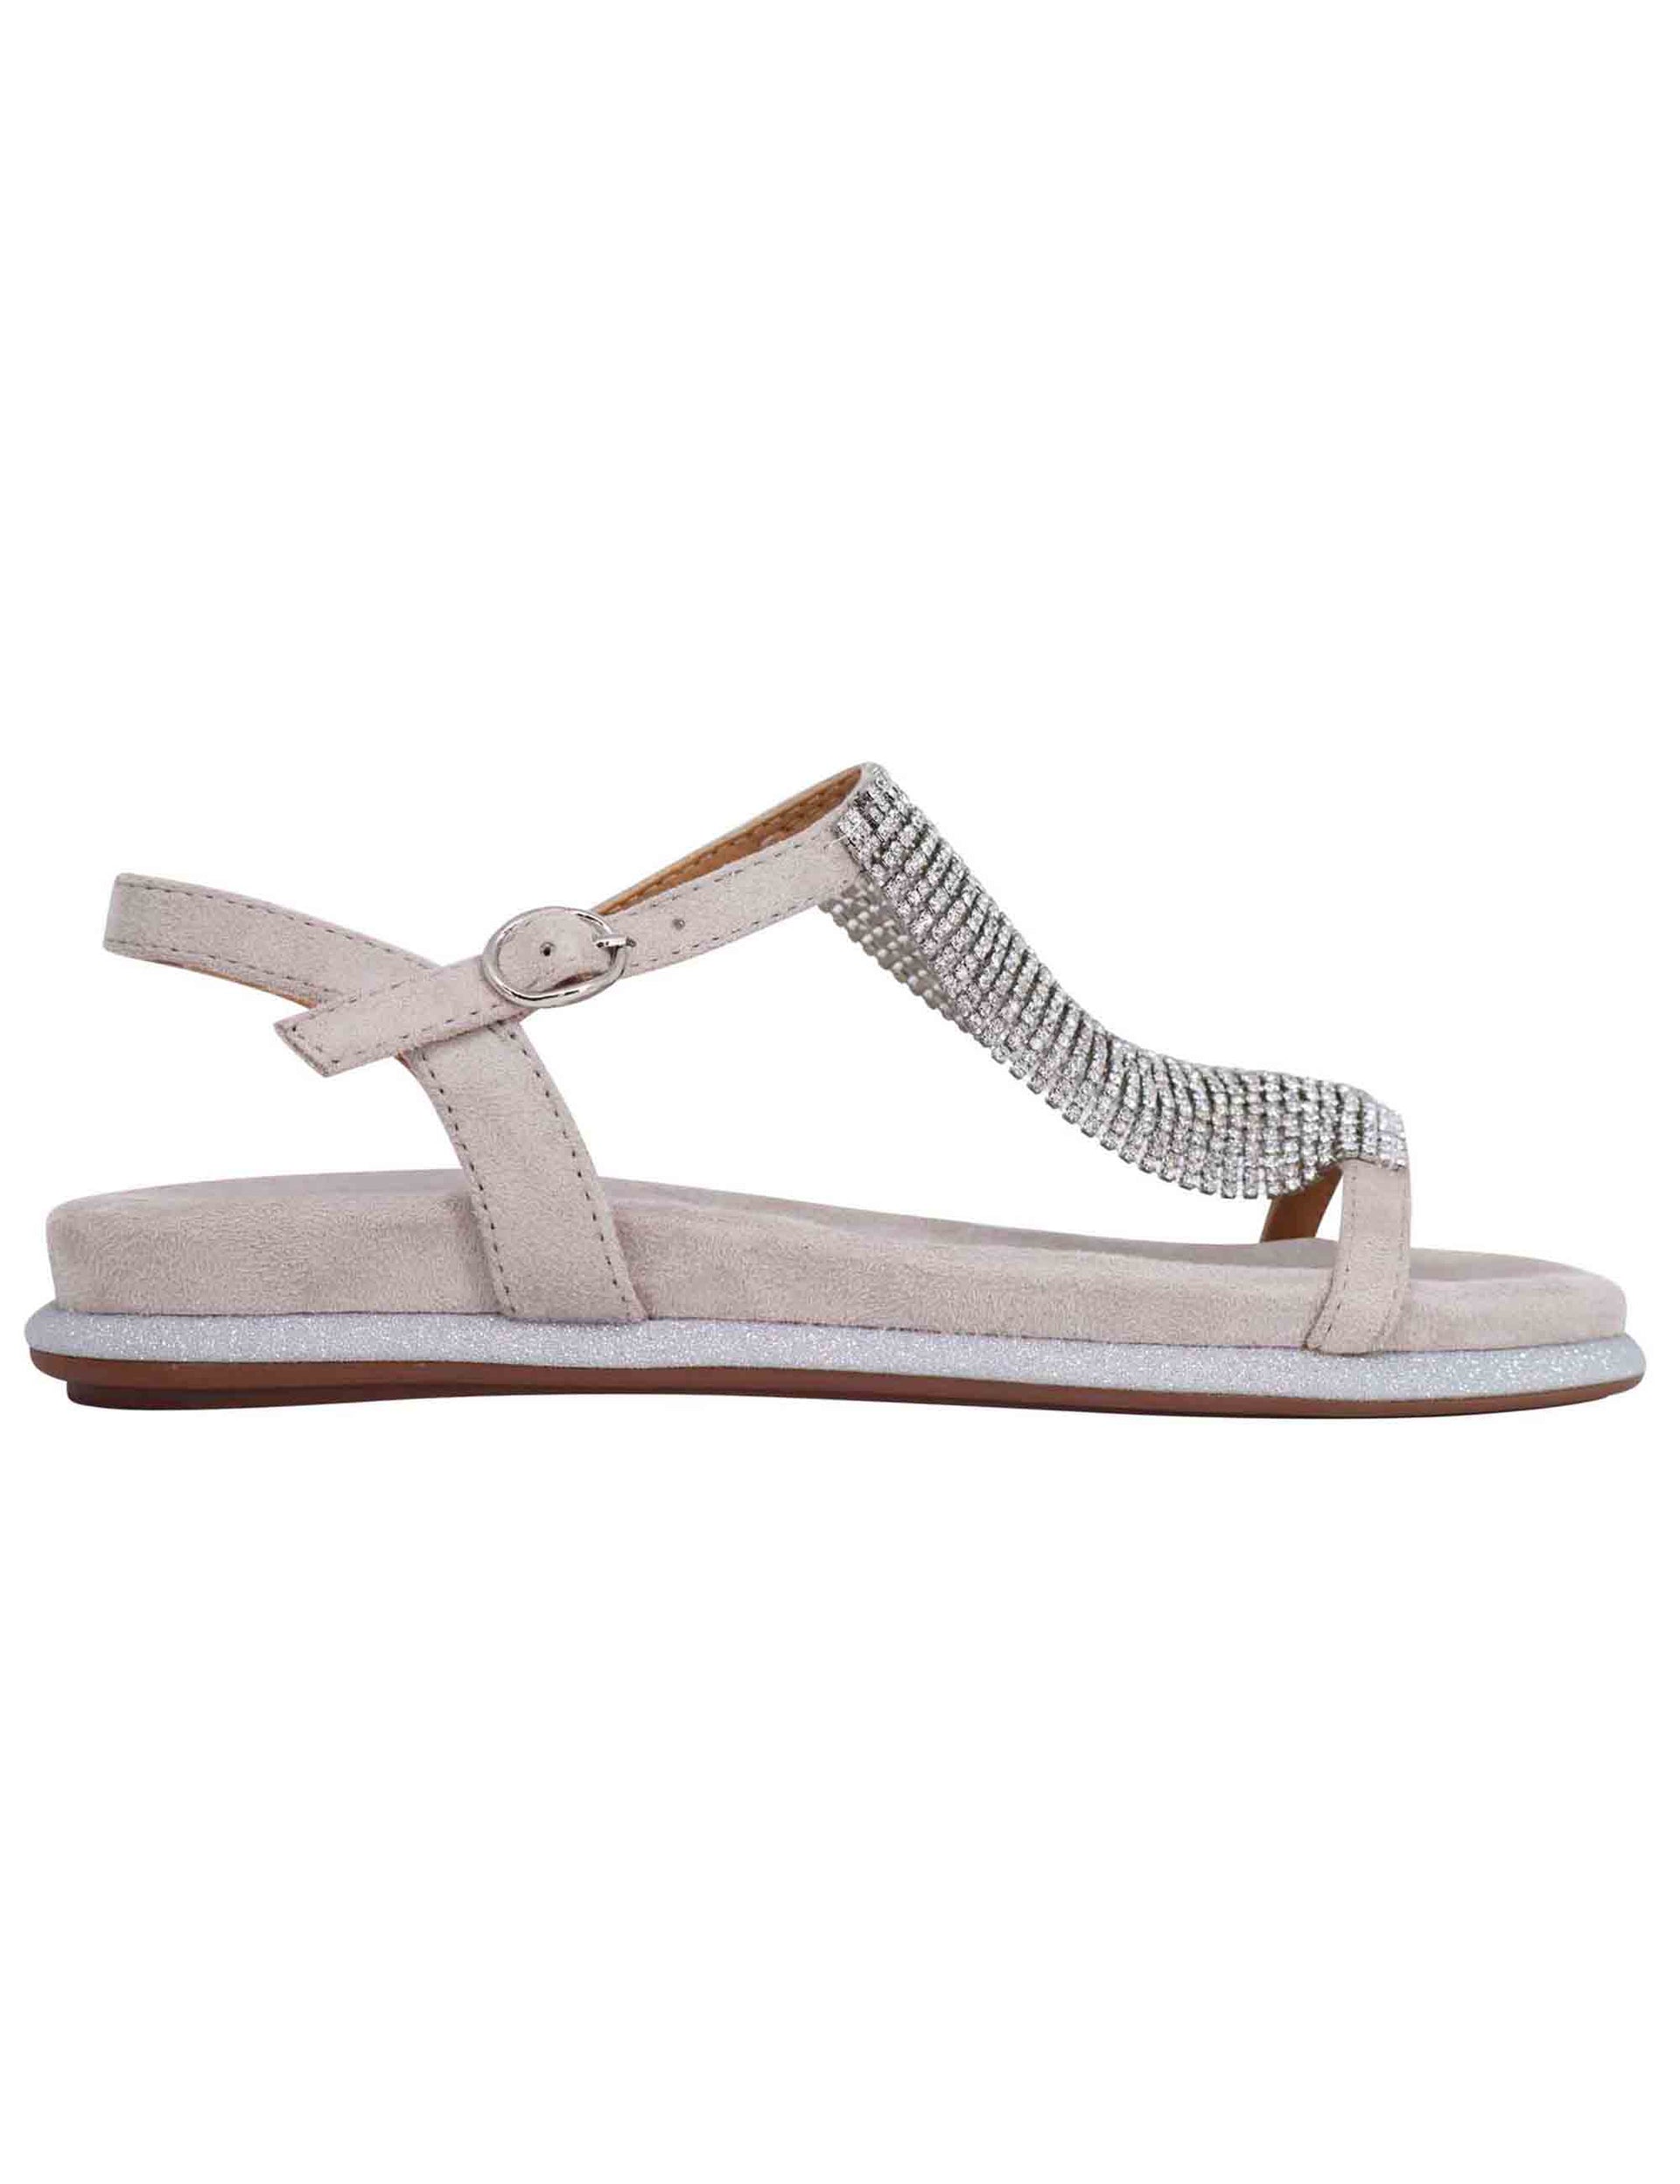 Women's flat sandals in gray eco suede with rhinestones and fussbett